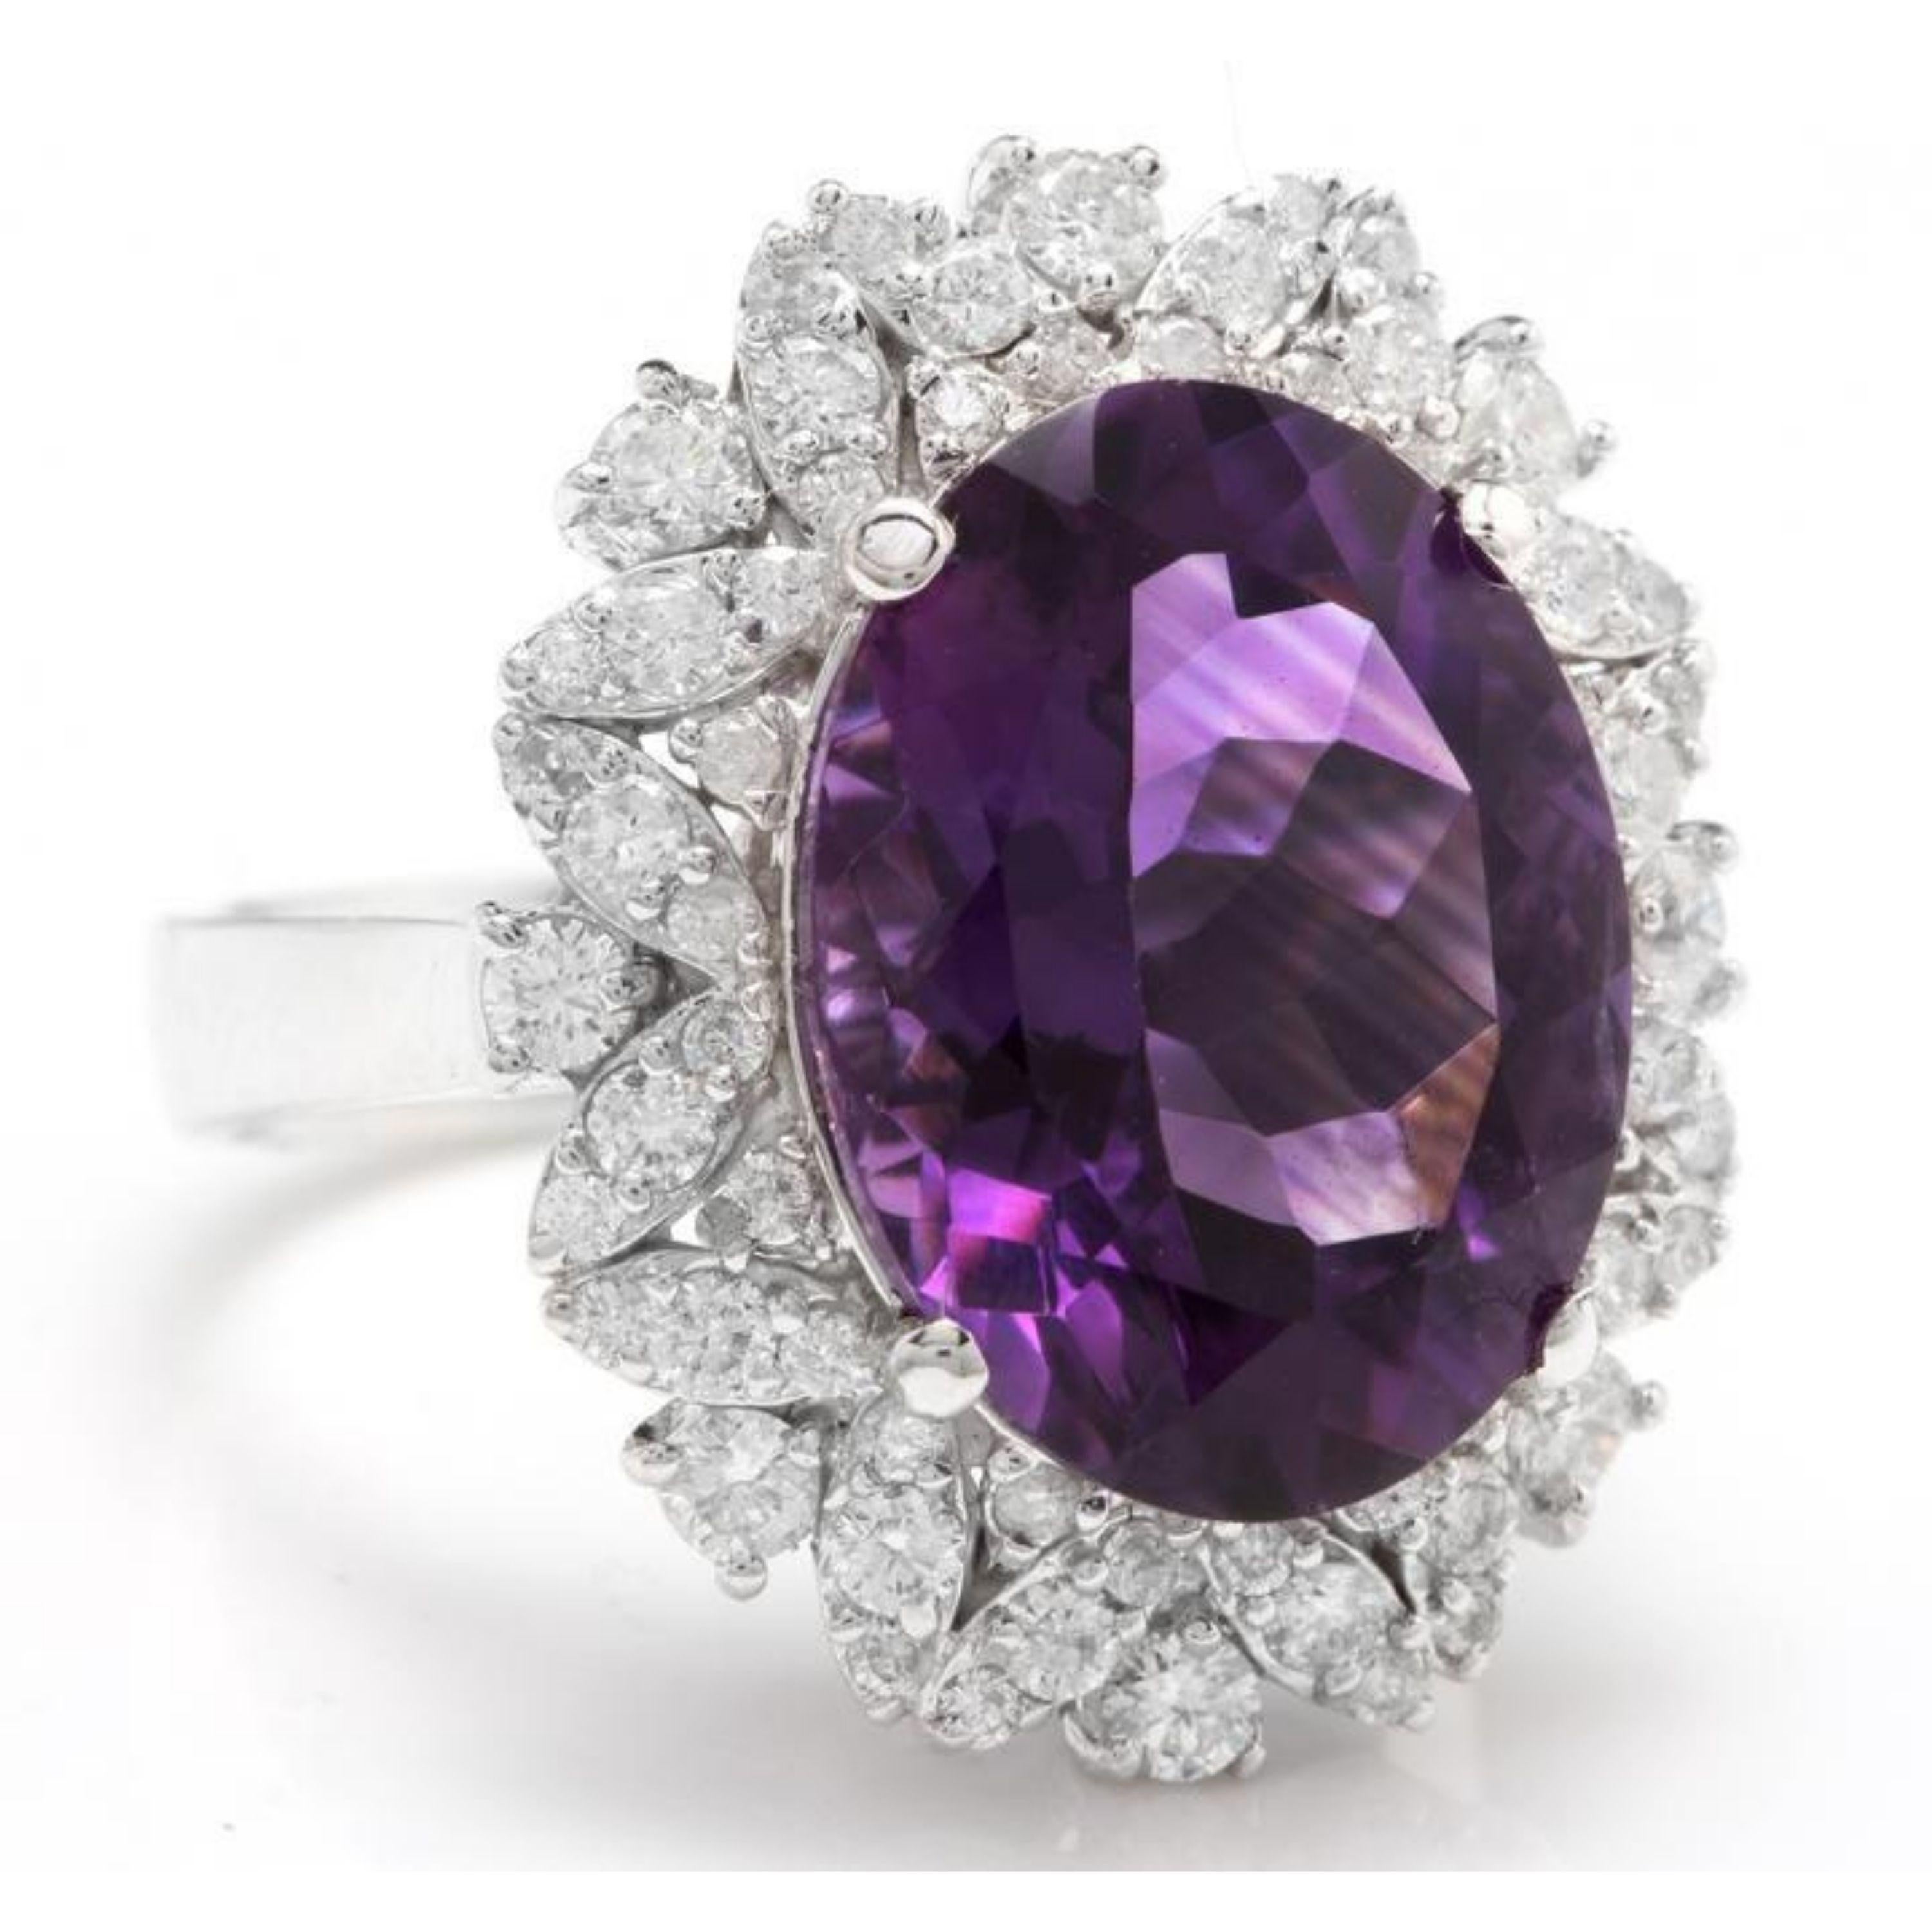 9.10 Carats Exquisite Natural Amethyst and Diamond 14K Solid White Gold Ring

Total Amethyst Weight is: Approx. 8.00 Carats

Amethyst Measures: Approx. 16.00 x 12.00mm

Natural Round Diamonds Weight: Approx. 1.10 Carats (color G-H / Clarity